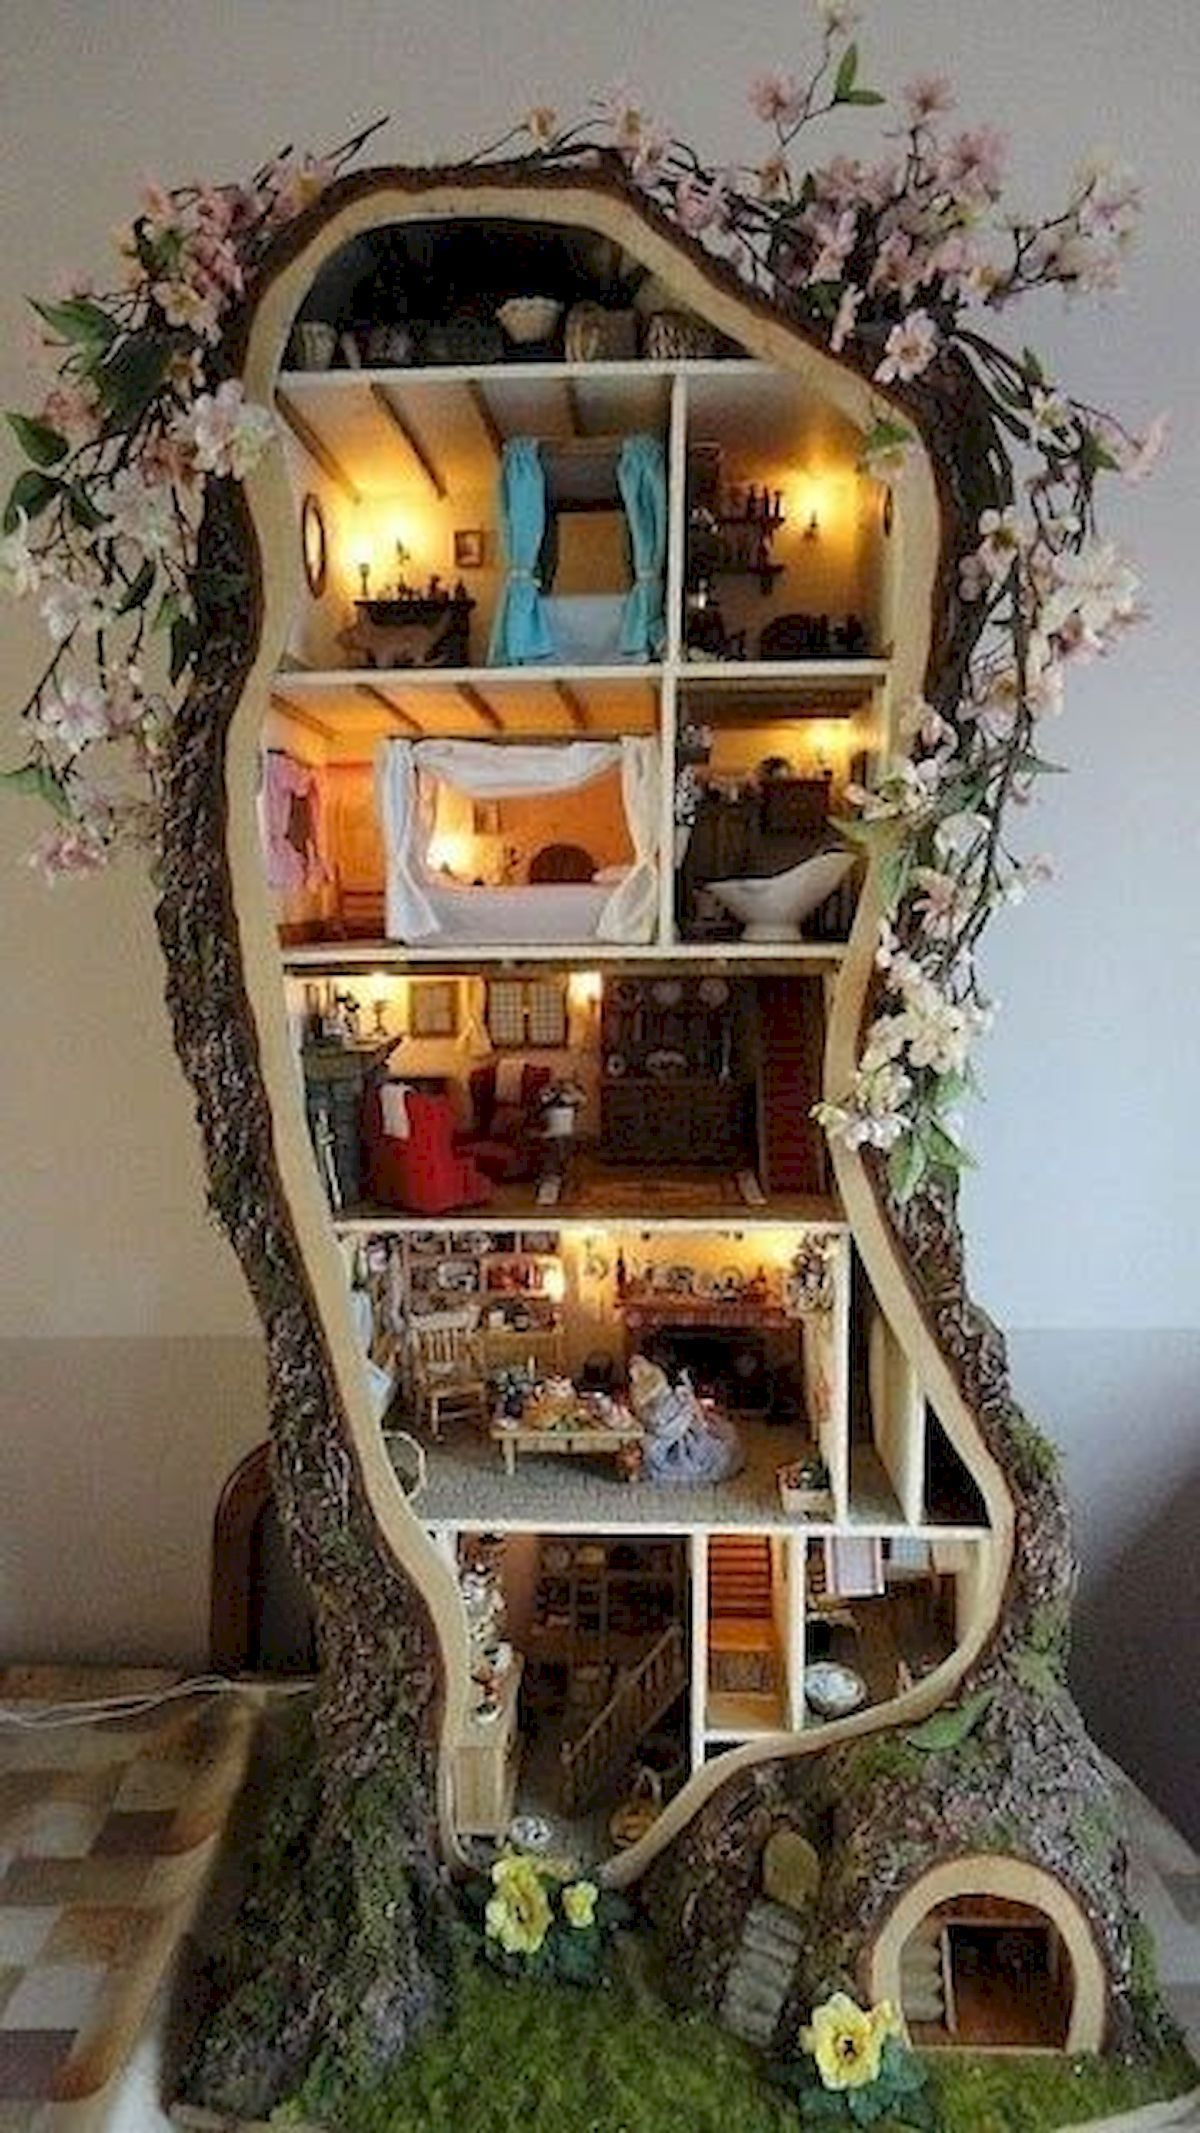 Mouse tree house Amusing DIY Dollhouse Projects Where Your Children Can Enjoy With Cherished Forever